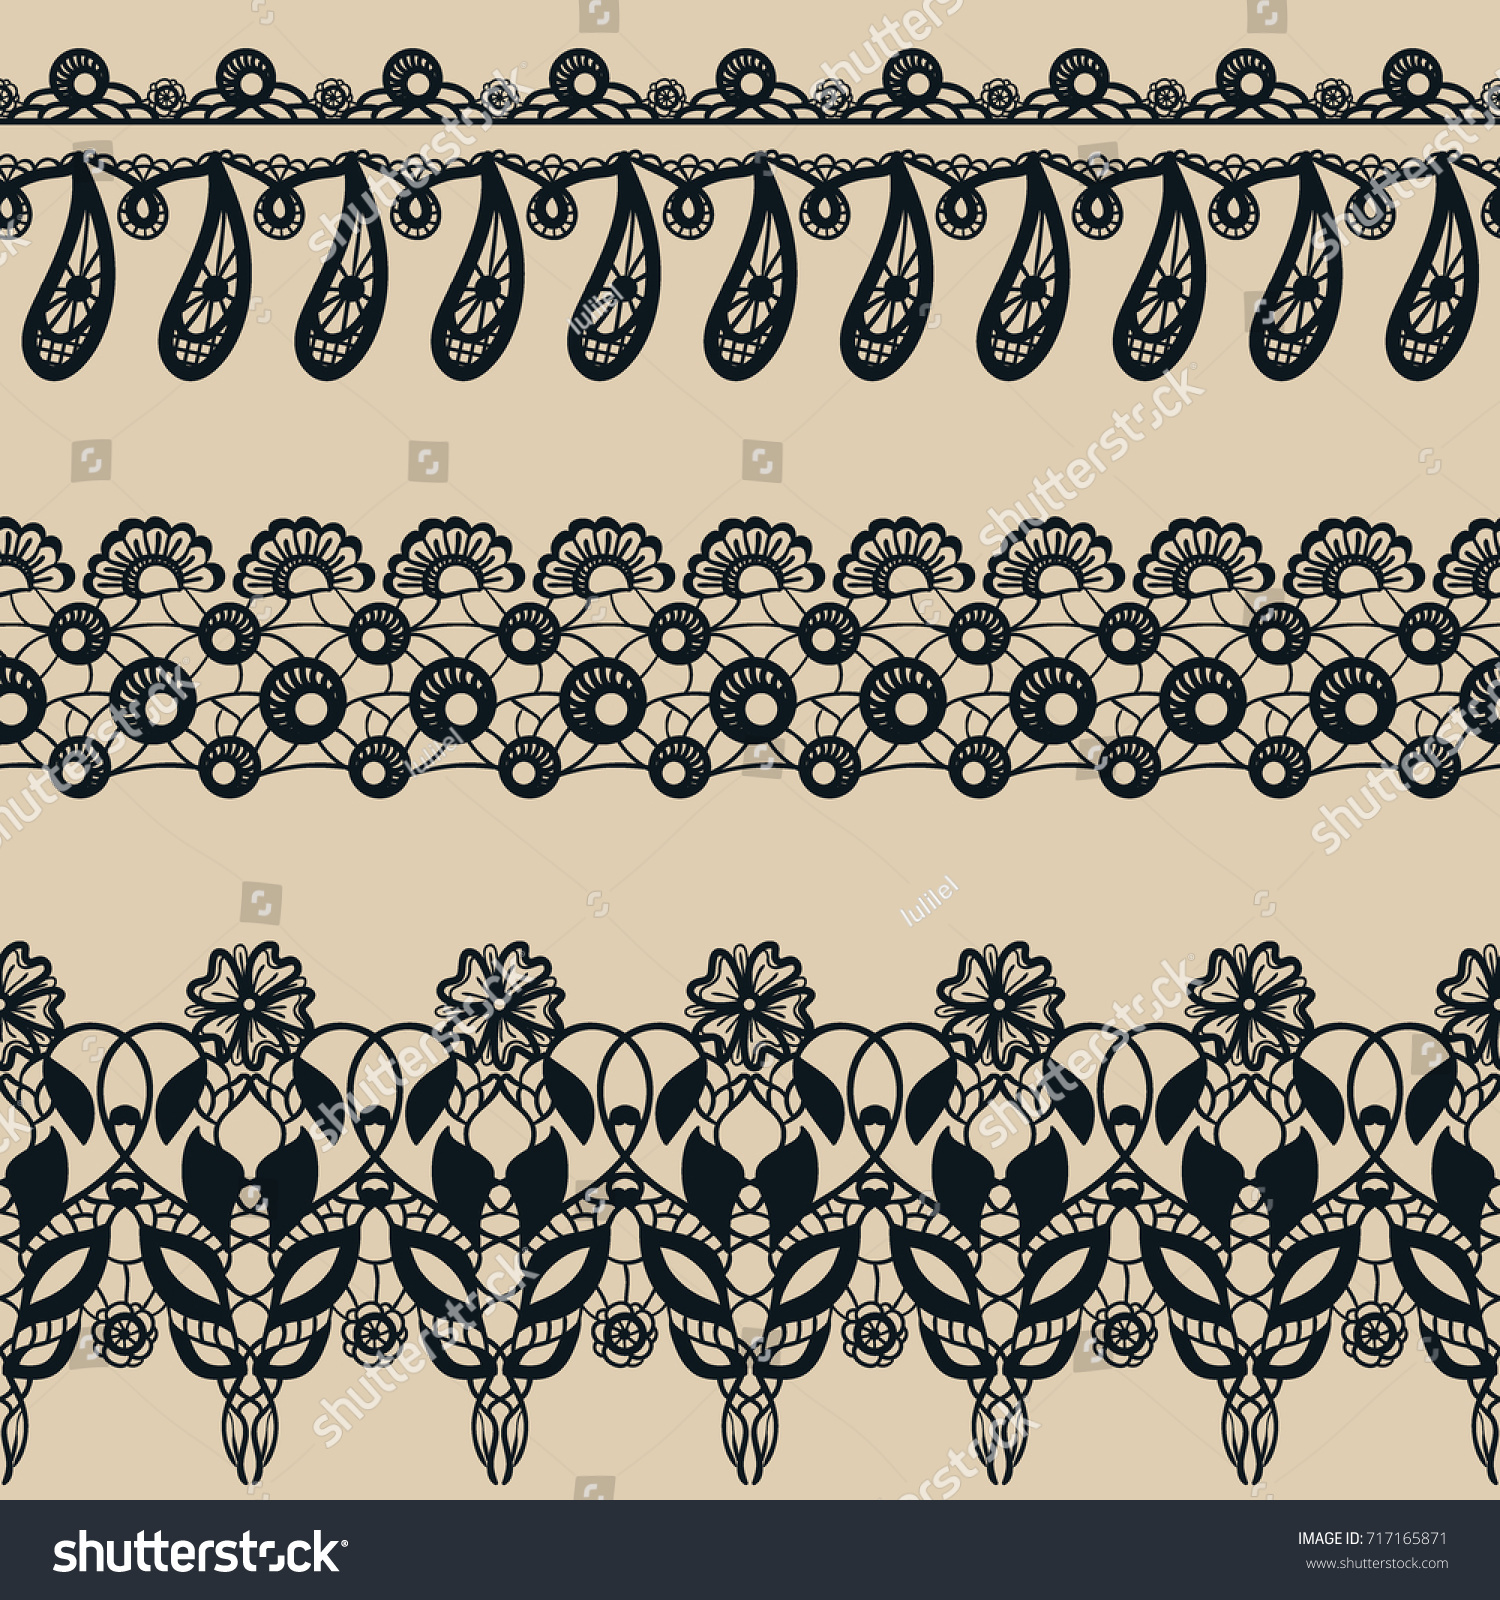 Vector set of lace seamless borders. Collection of decorative patterns: flowers and leaves. Ornamental floral motifs. Lacy vintage ornaments #717165871